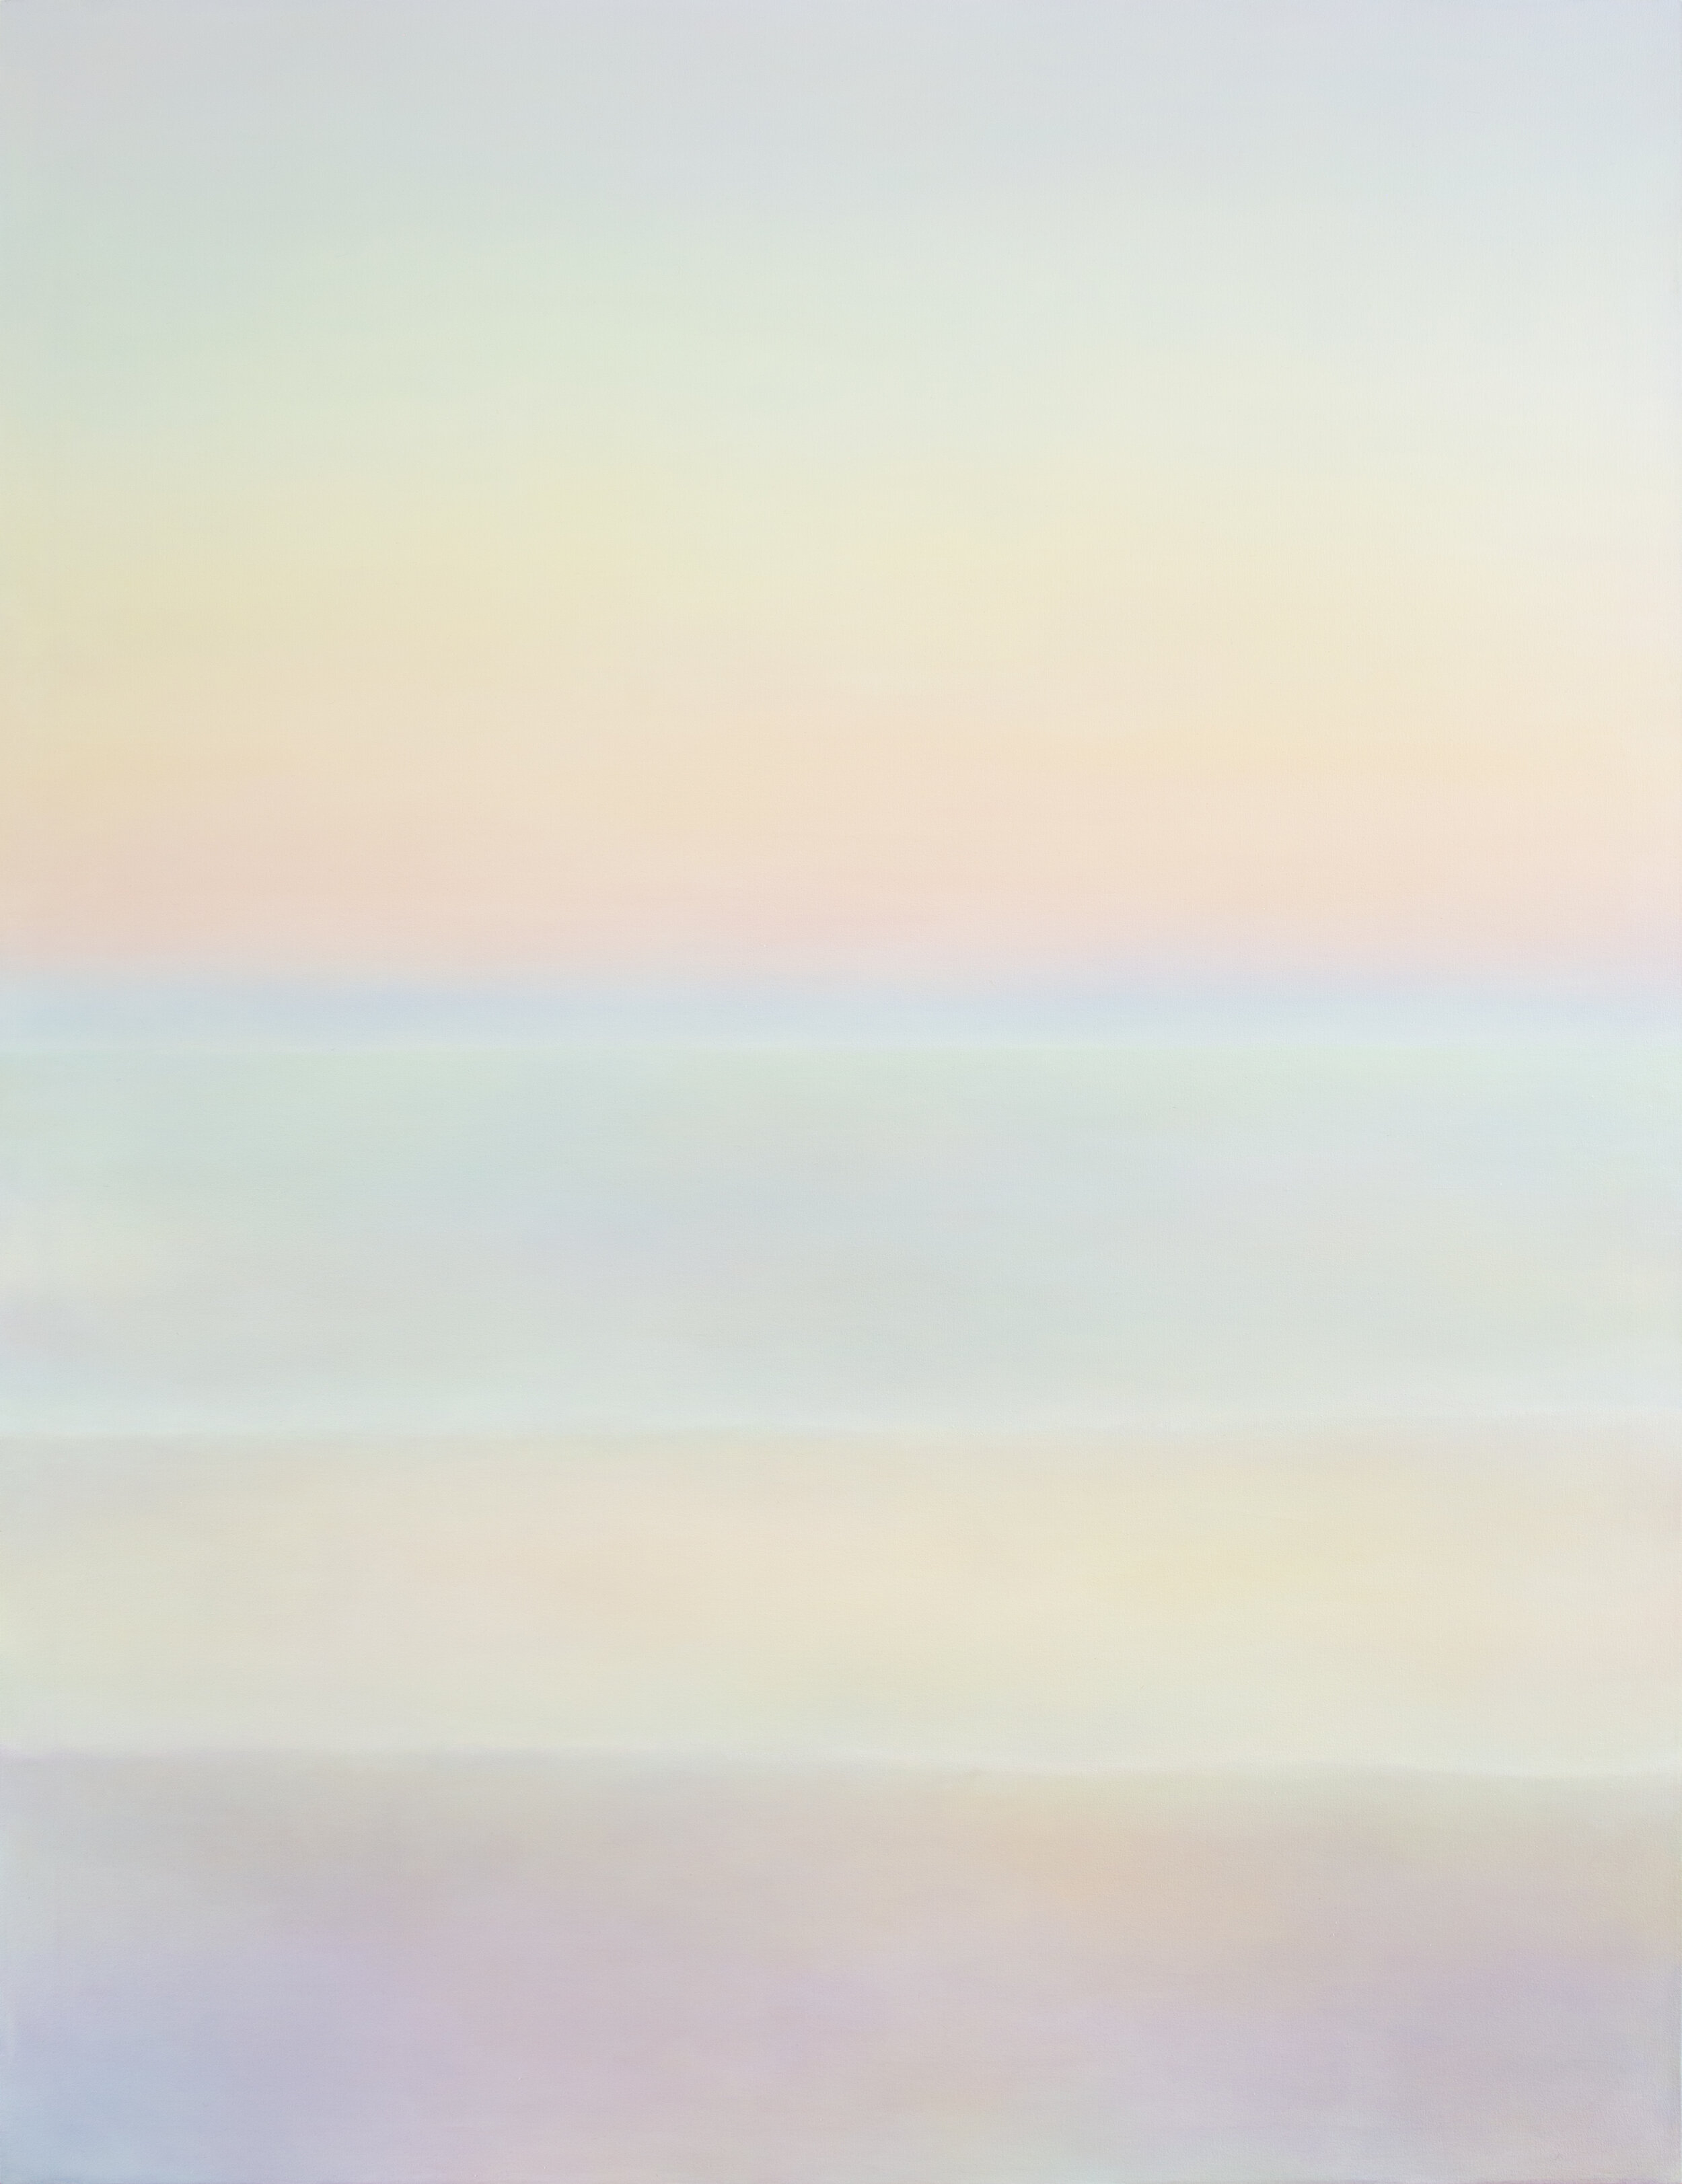  Shuling Guo,  &lt;5—6 pm&gt;-22  , 2020 ,  Oil on canvas, 78 x 60 inches 